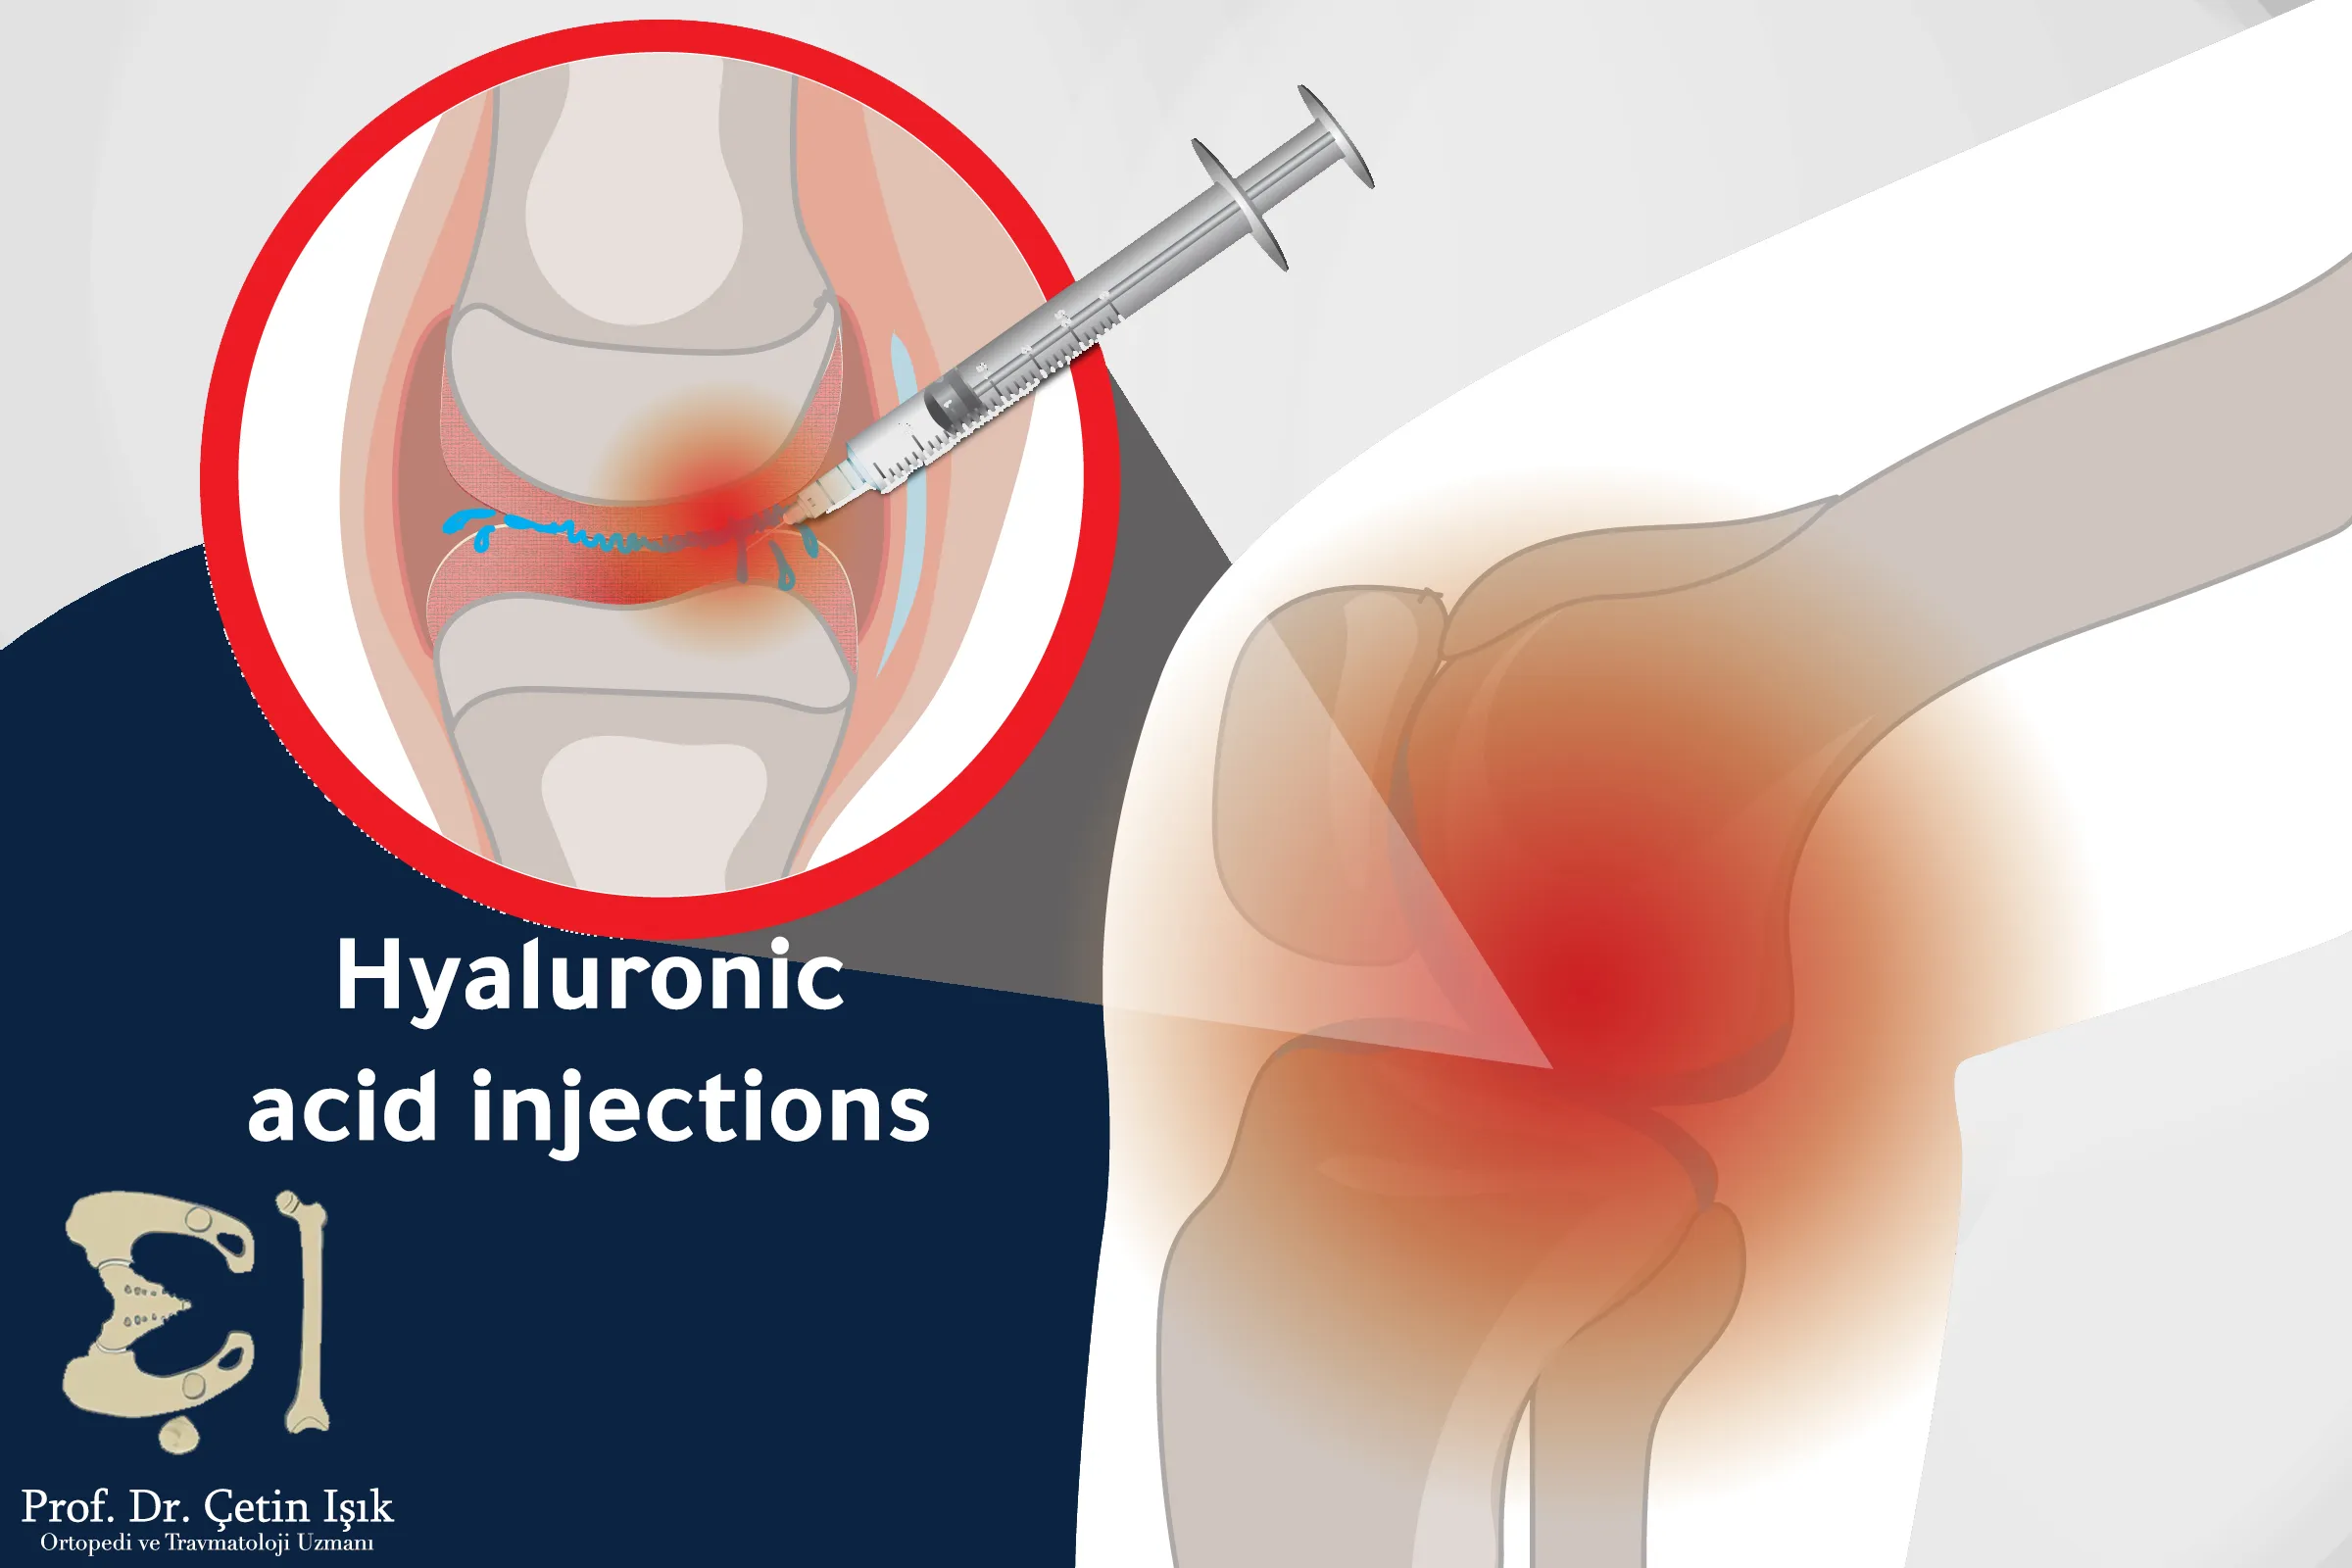 Hyaluronic acid injections help relieve pain and joint stiffness